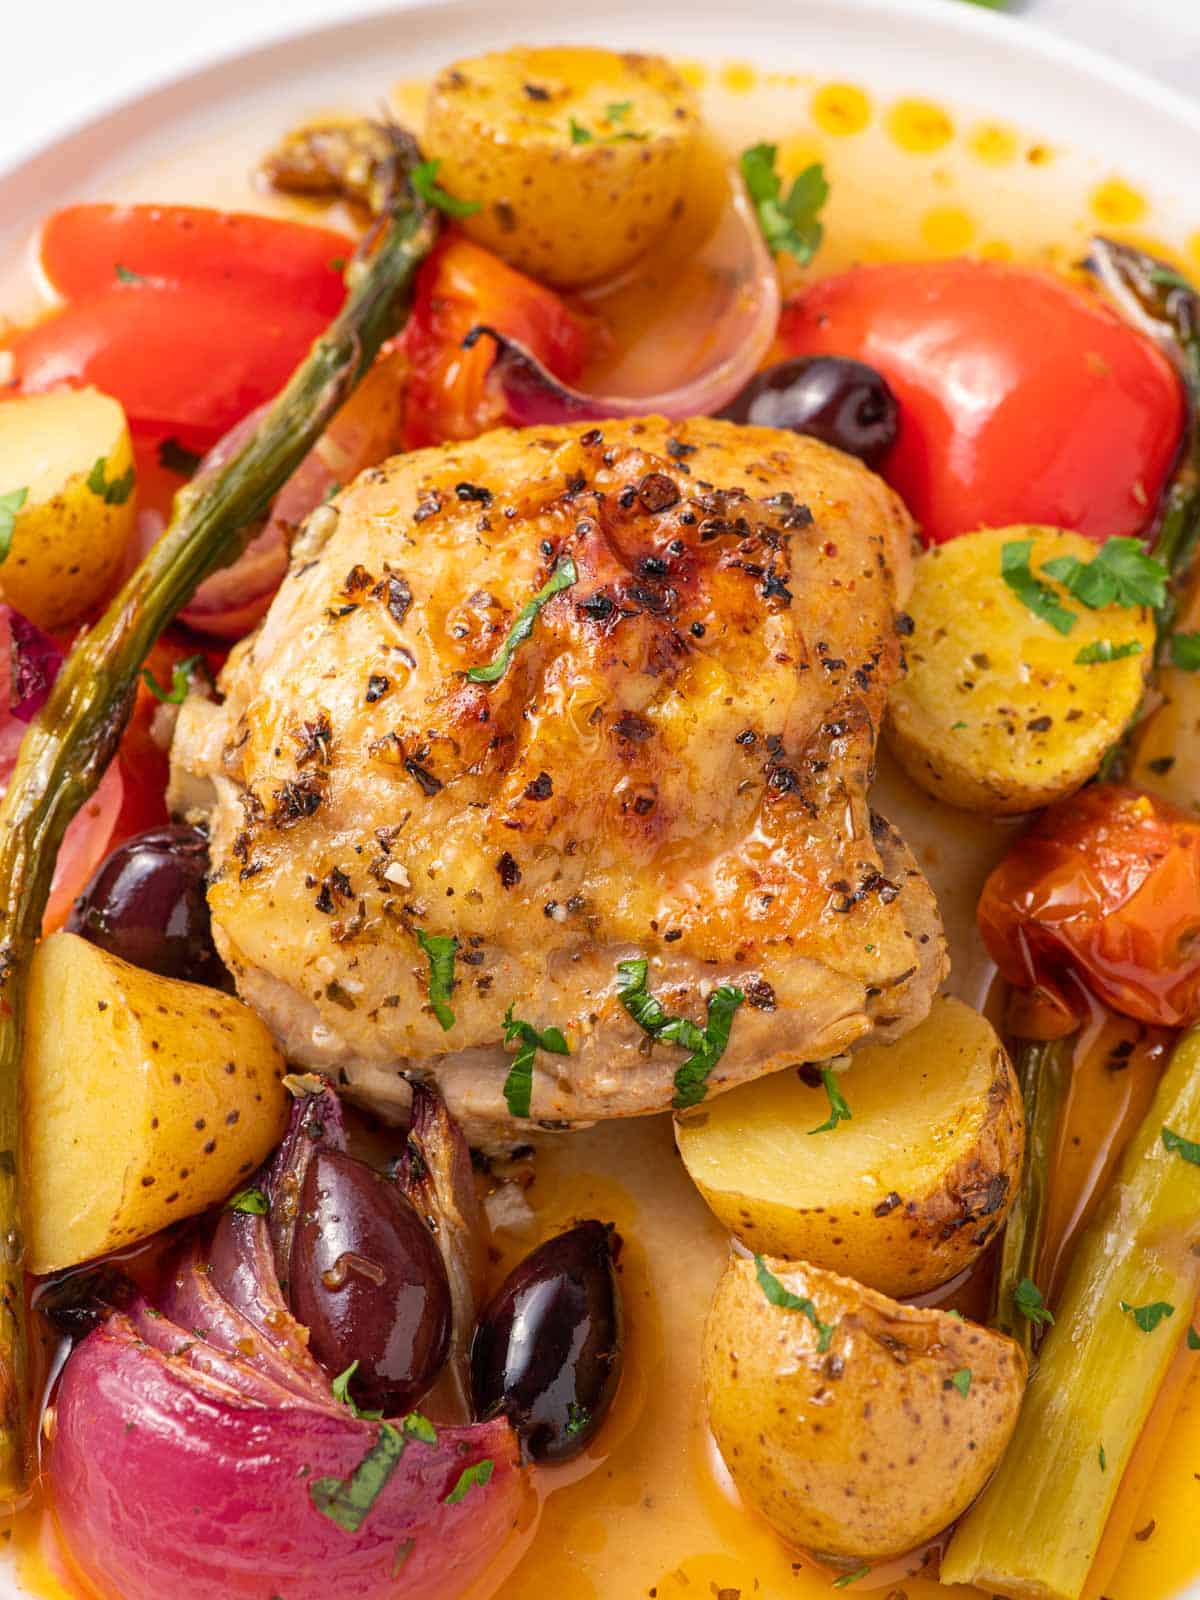 Chicken with olives and vegetables.